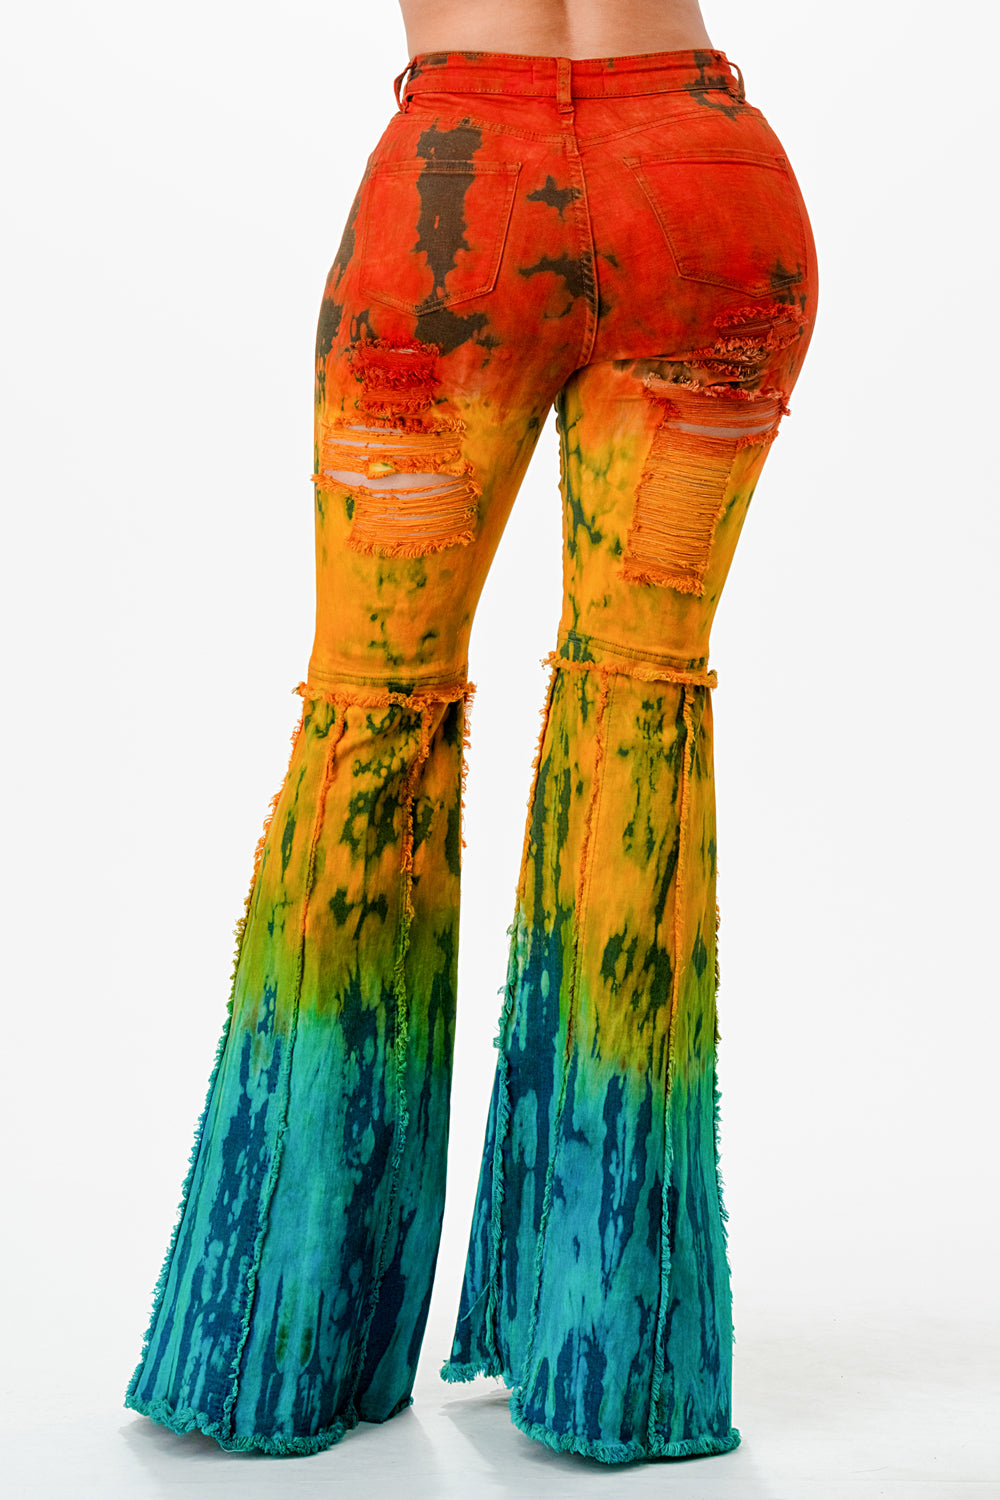 Purple Candy Jeans Women Denim Pants Tie Dye Flare Jeans High Rise Stretch Frayed (Orange Turquois)